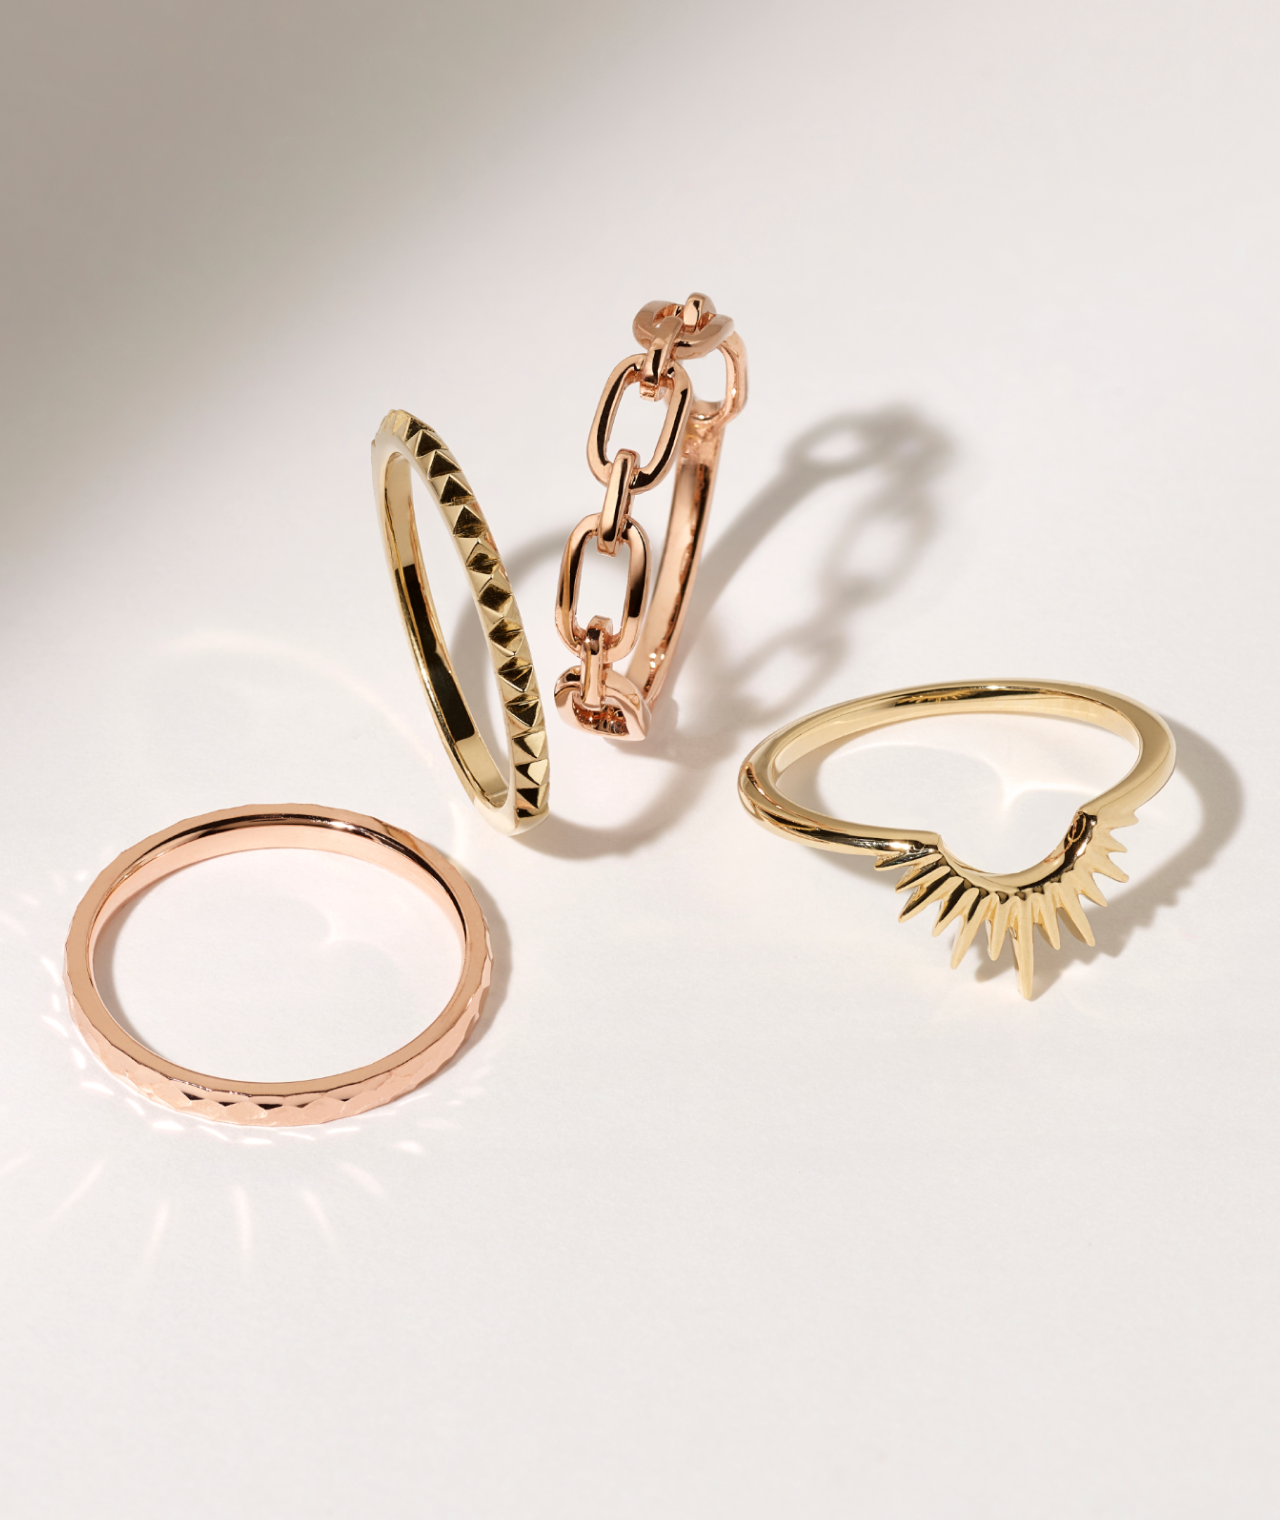 2 rose gold bands and 2 gold bands as examples for ring stacking